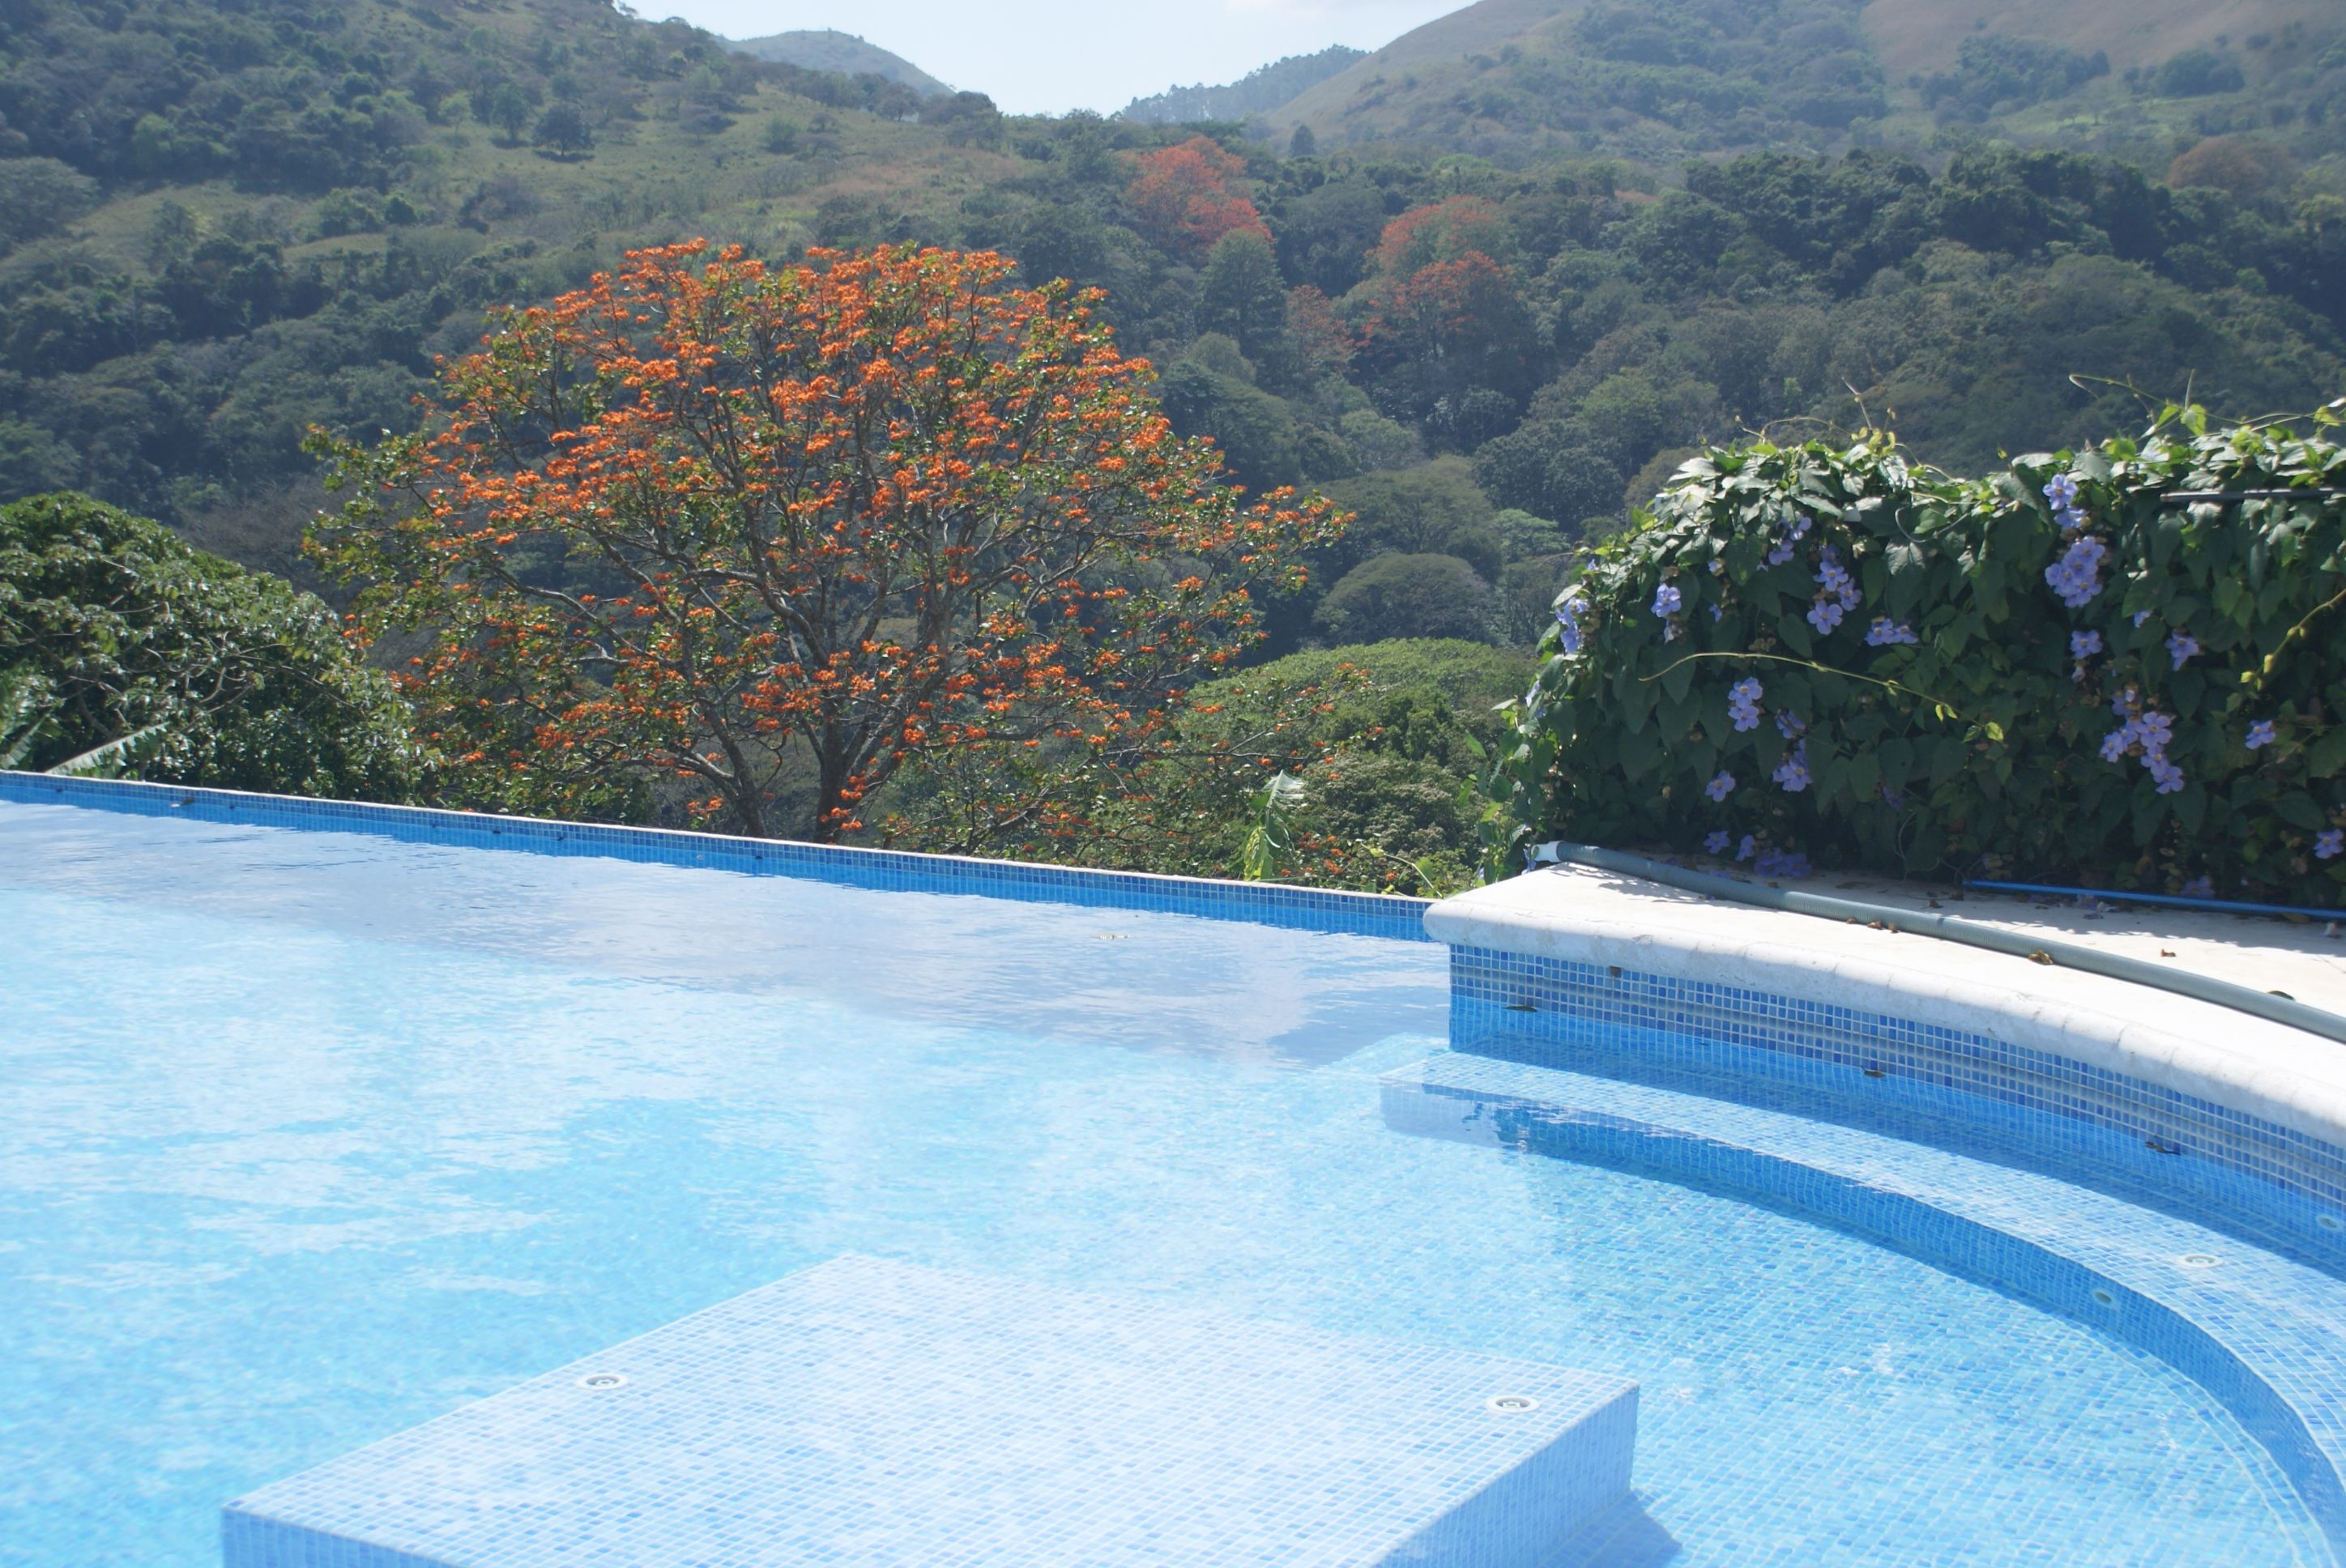 7 bedroom Hotel for sale with countryside and panoramic views in Naranjo, Central Costa Rica